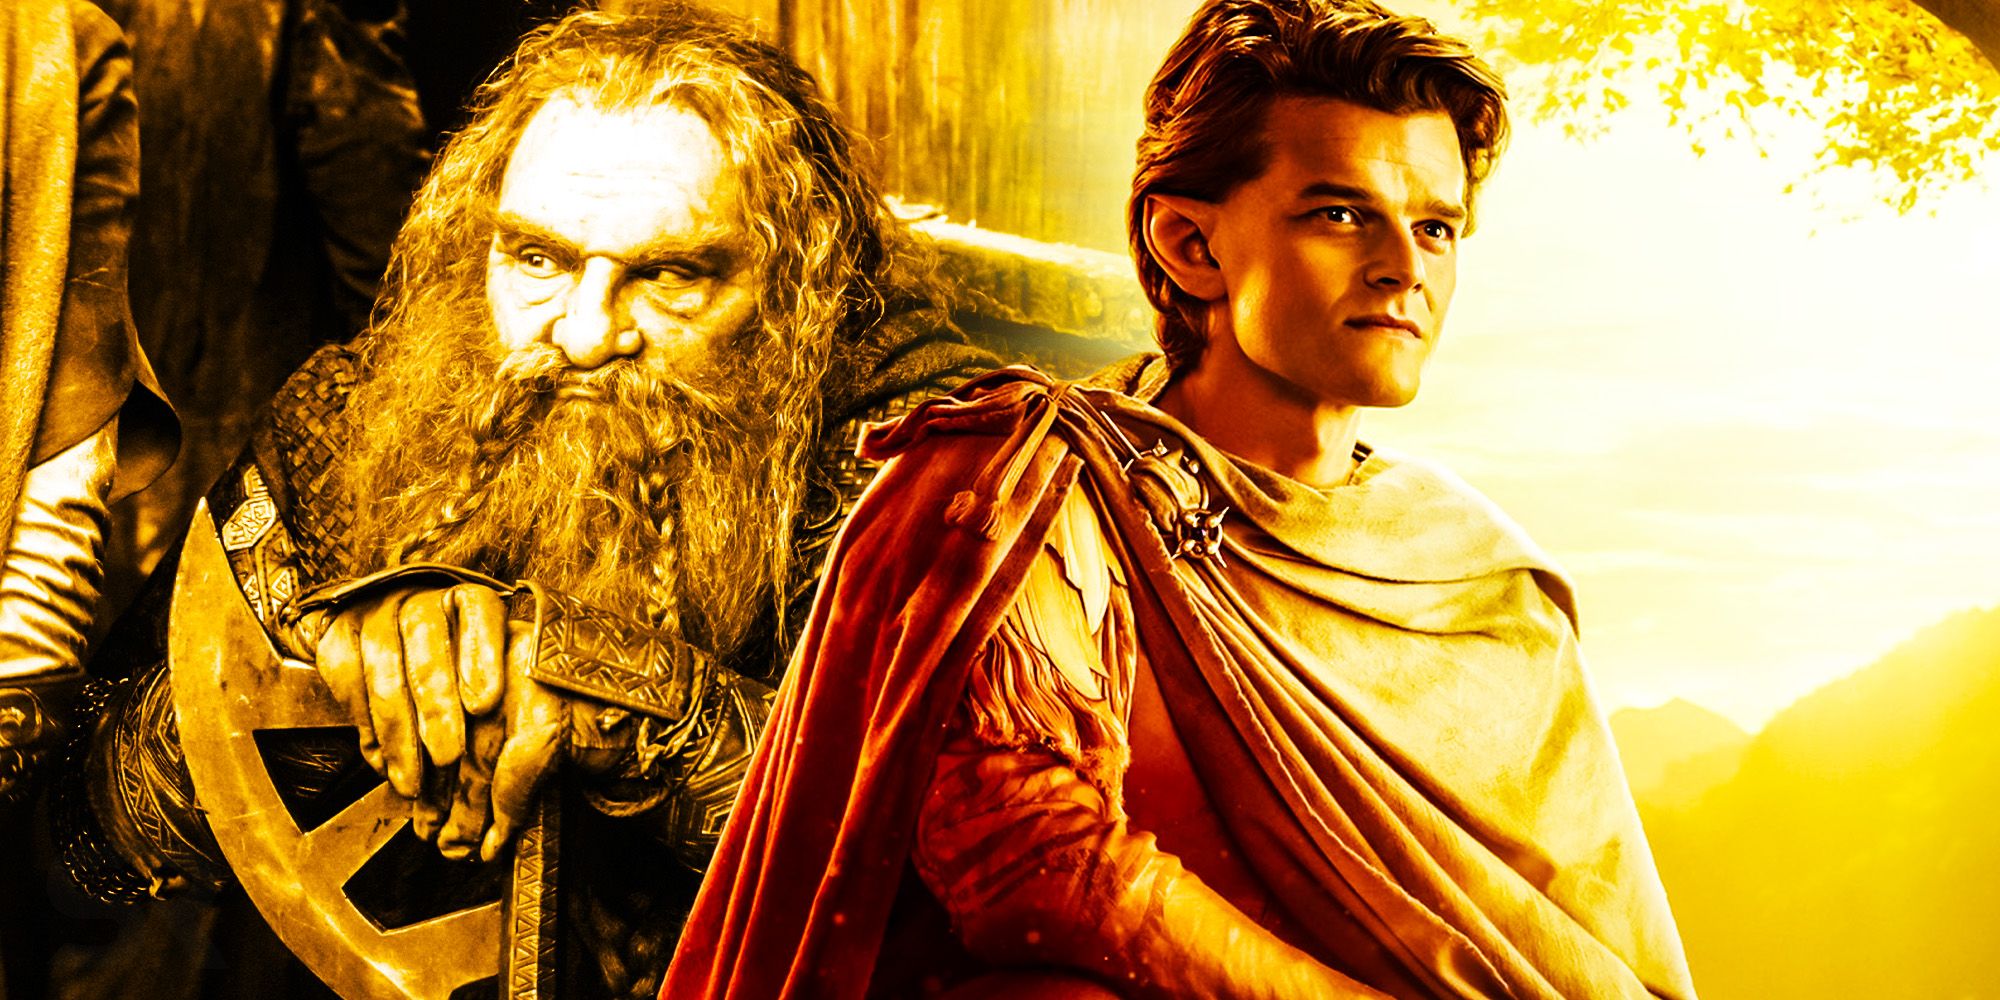 John Rhys Davies as Gimli in Lord of the Rings and Robert Aramayo as Elrond in Rings of Power